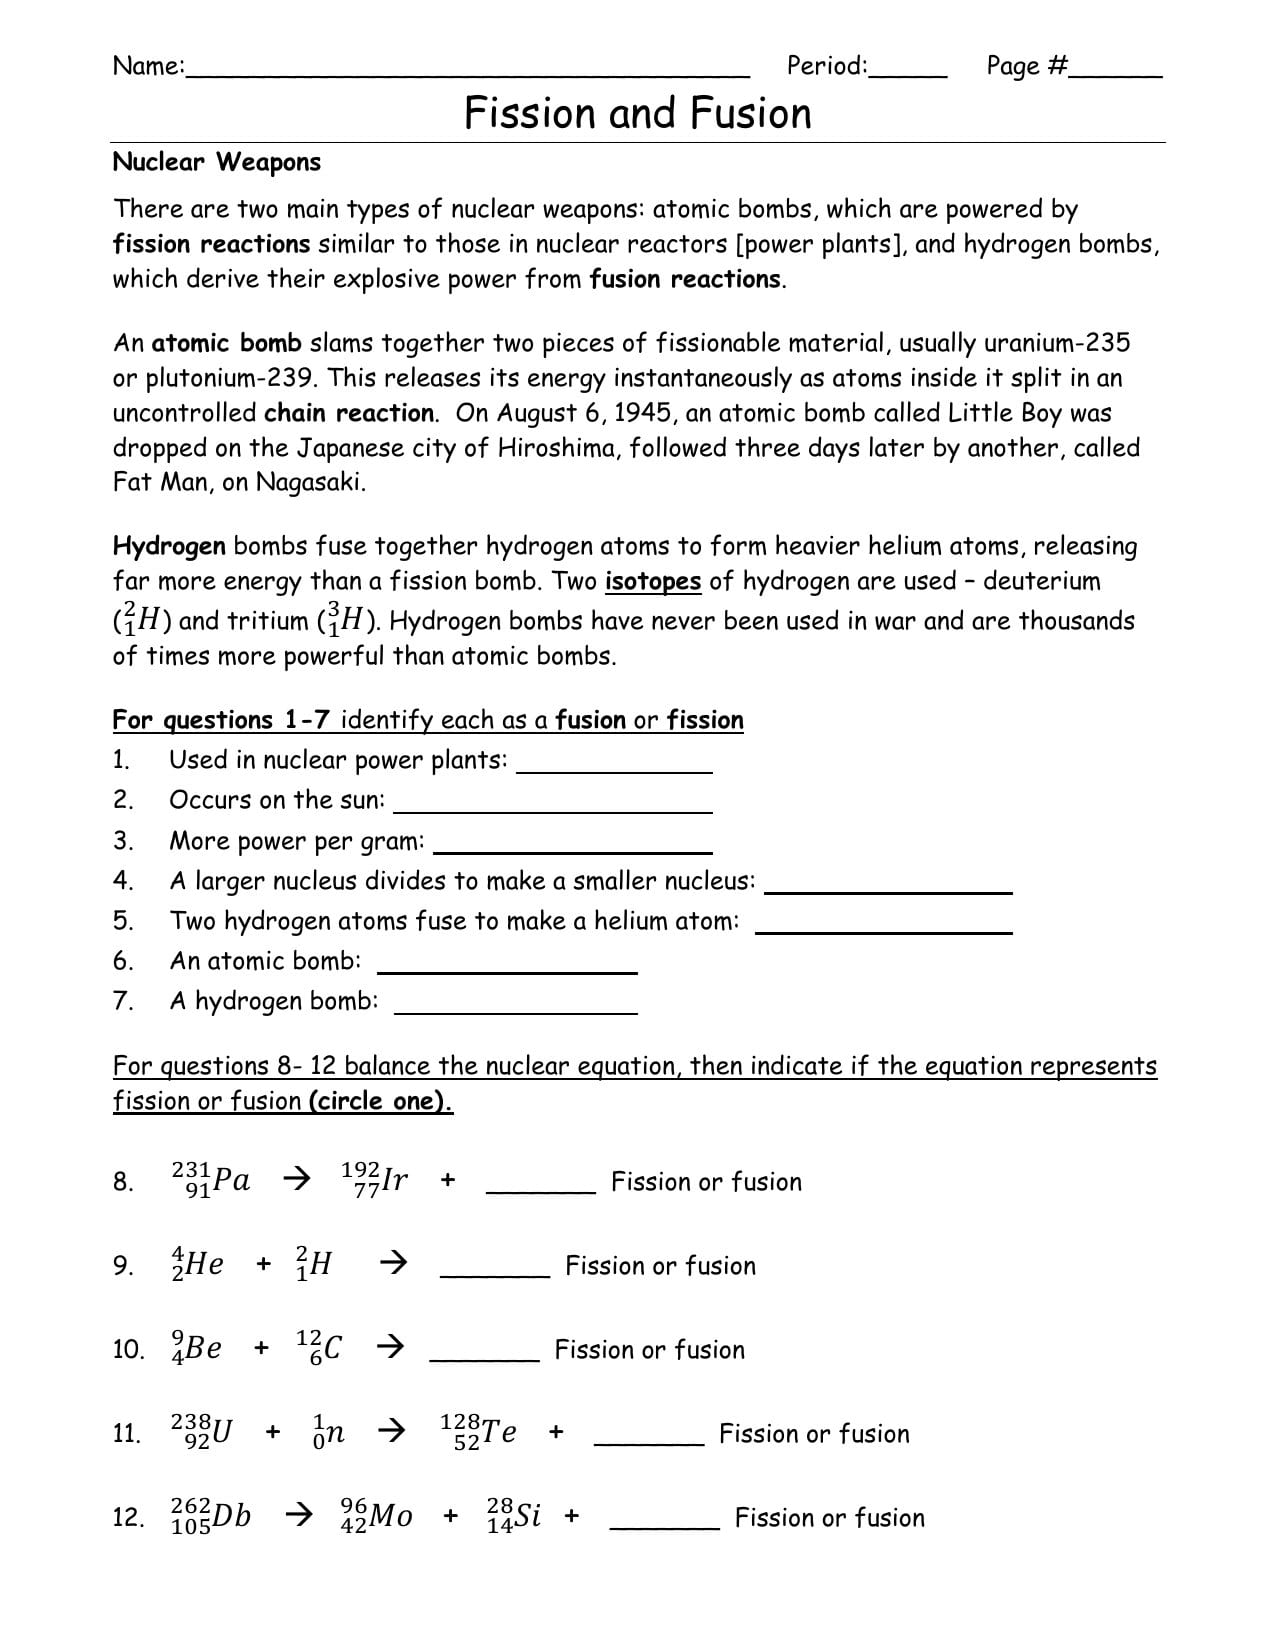 Nuclear Fission And Fusion Fission And Fusion Worksheet For Phase Intended For Nuclear Fission And Fusion Worksheet Answers